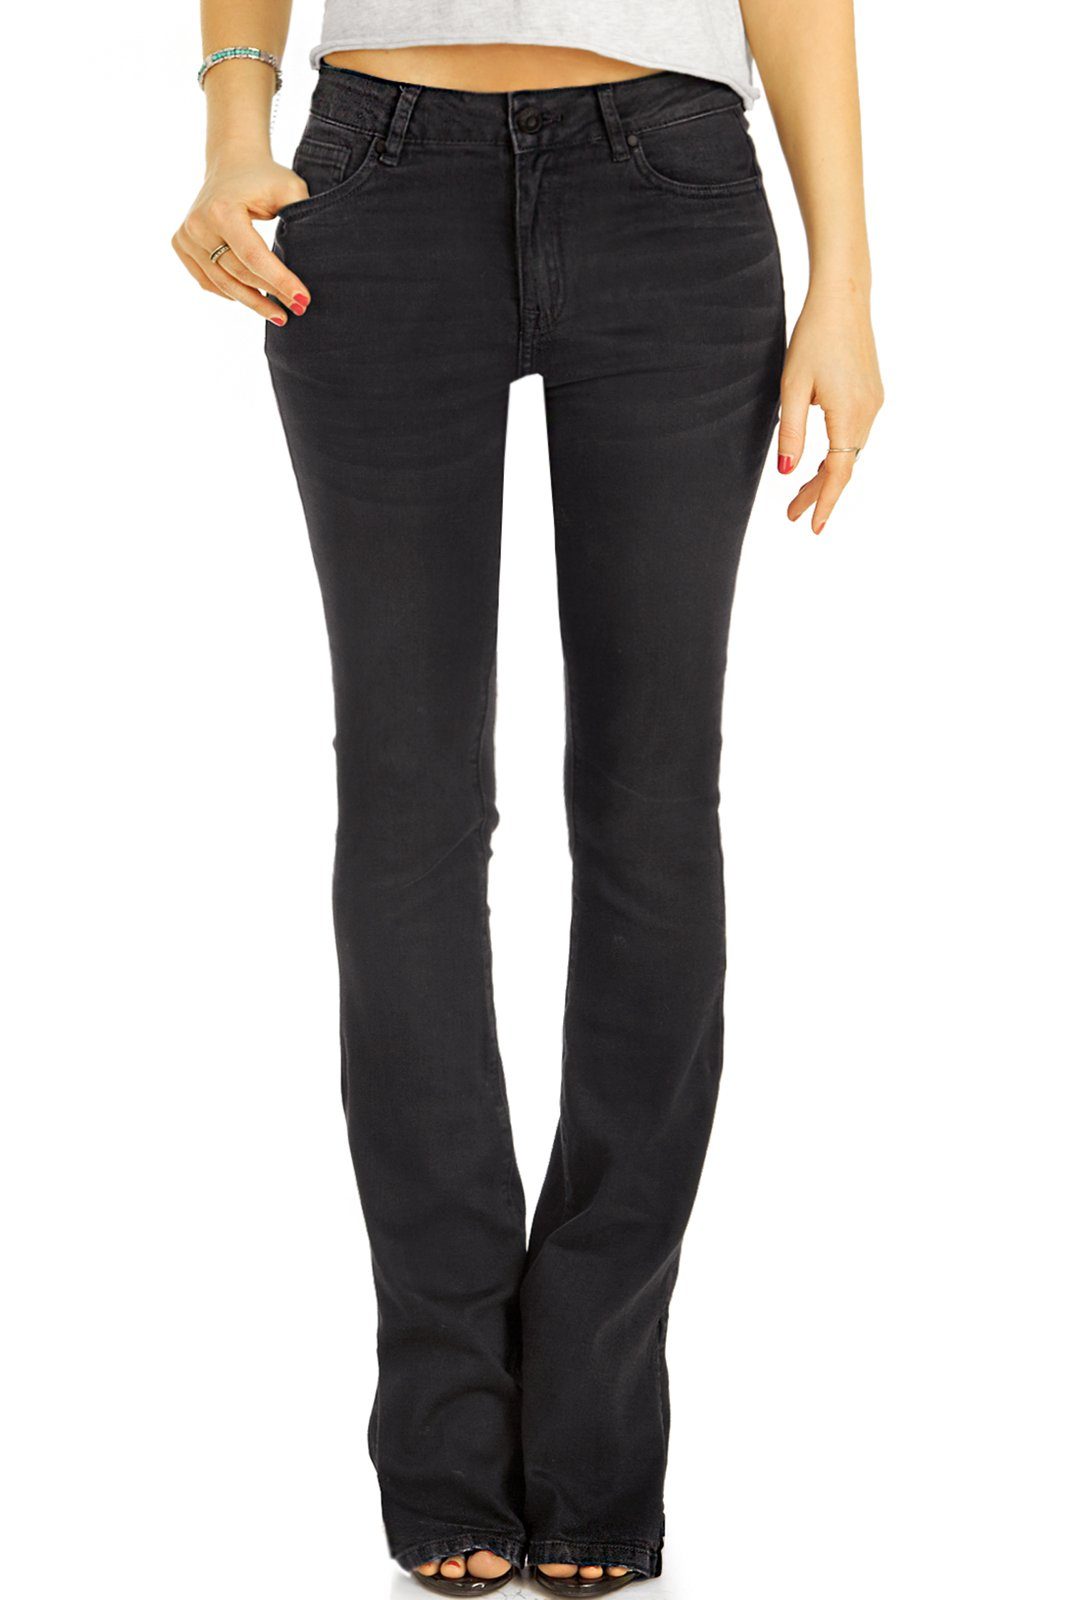 be styled Bootcut-Jeans Bootcut Jeans j27r Hose - out mit - Damen cut 5-Pocket-Style waist mit Stretch-Anteil, mid